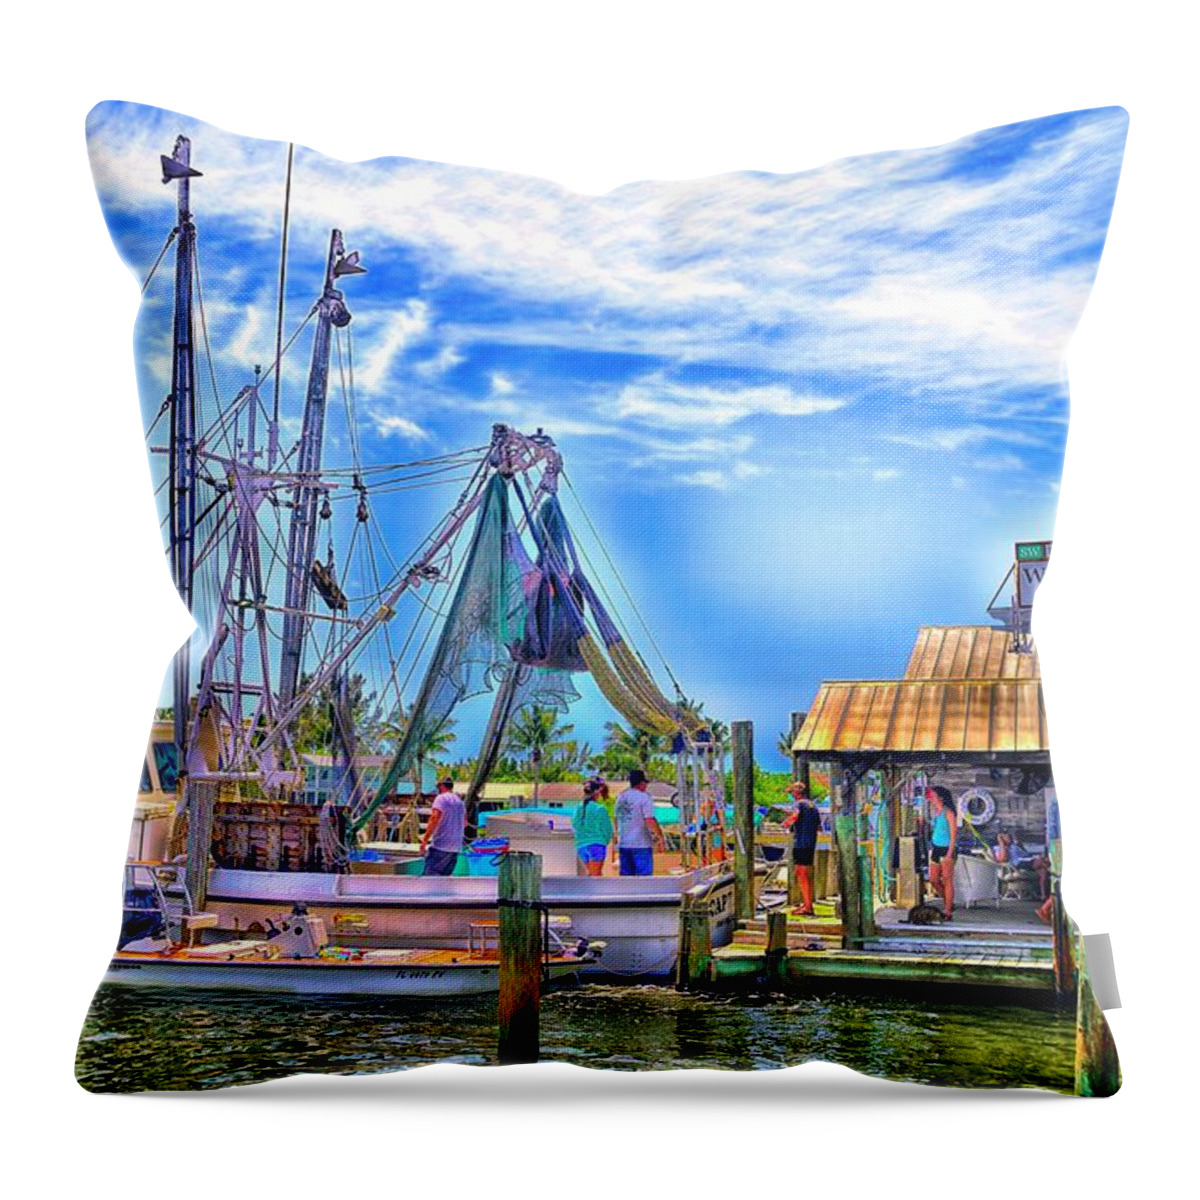 Boca Grande Throw Pillow featuring the photograph Shrimp Boating by Alison Belsan Horton